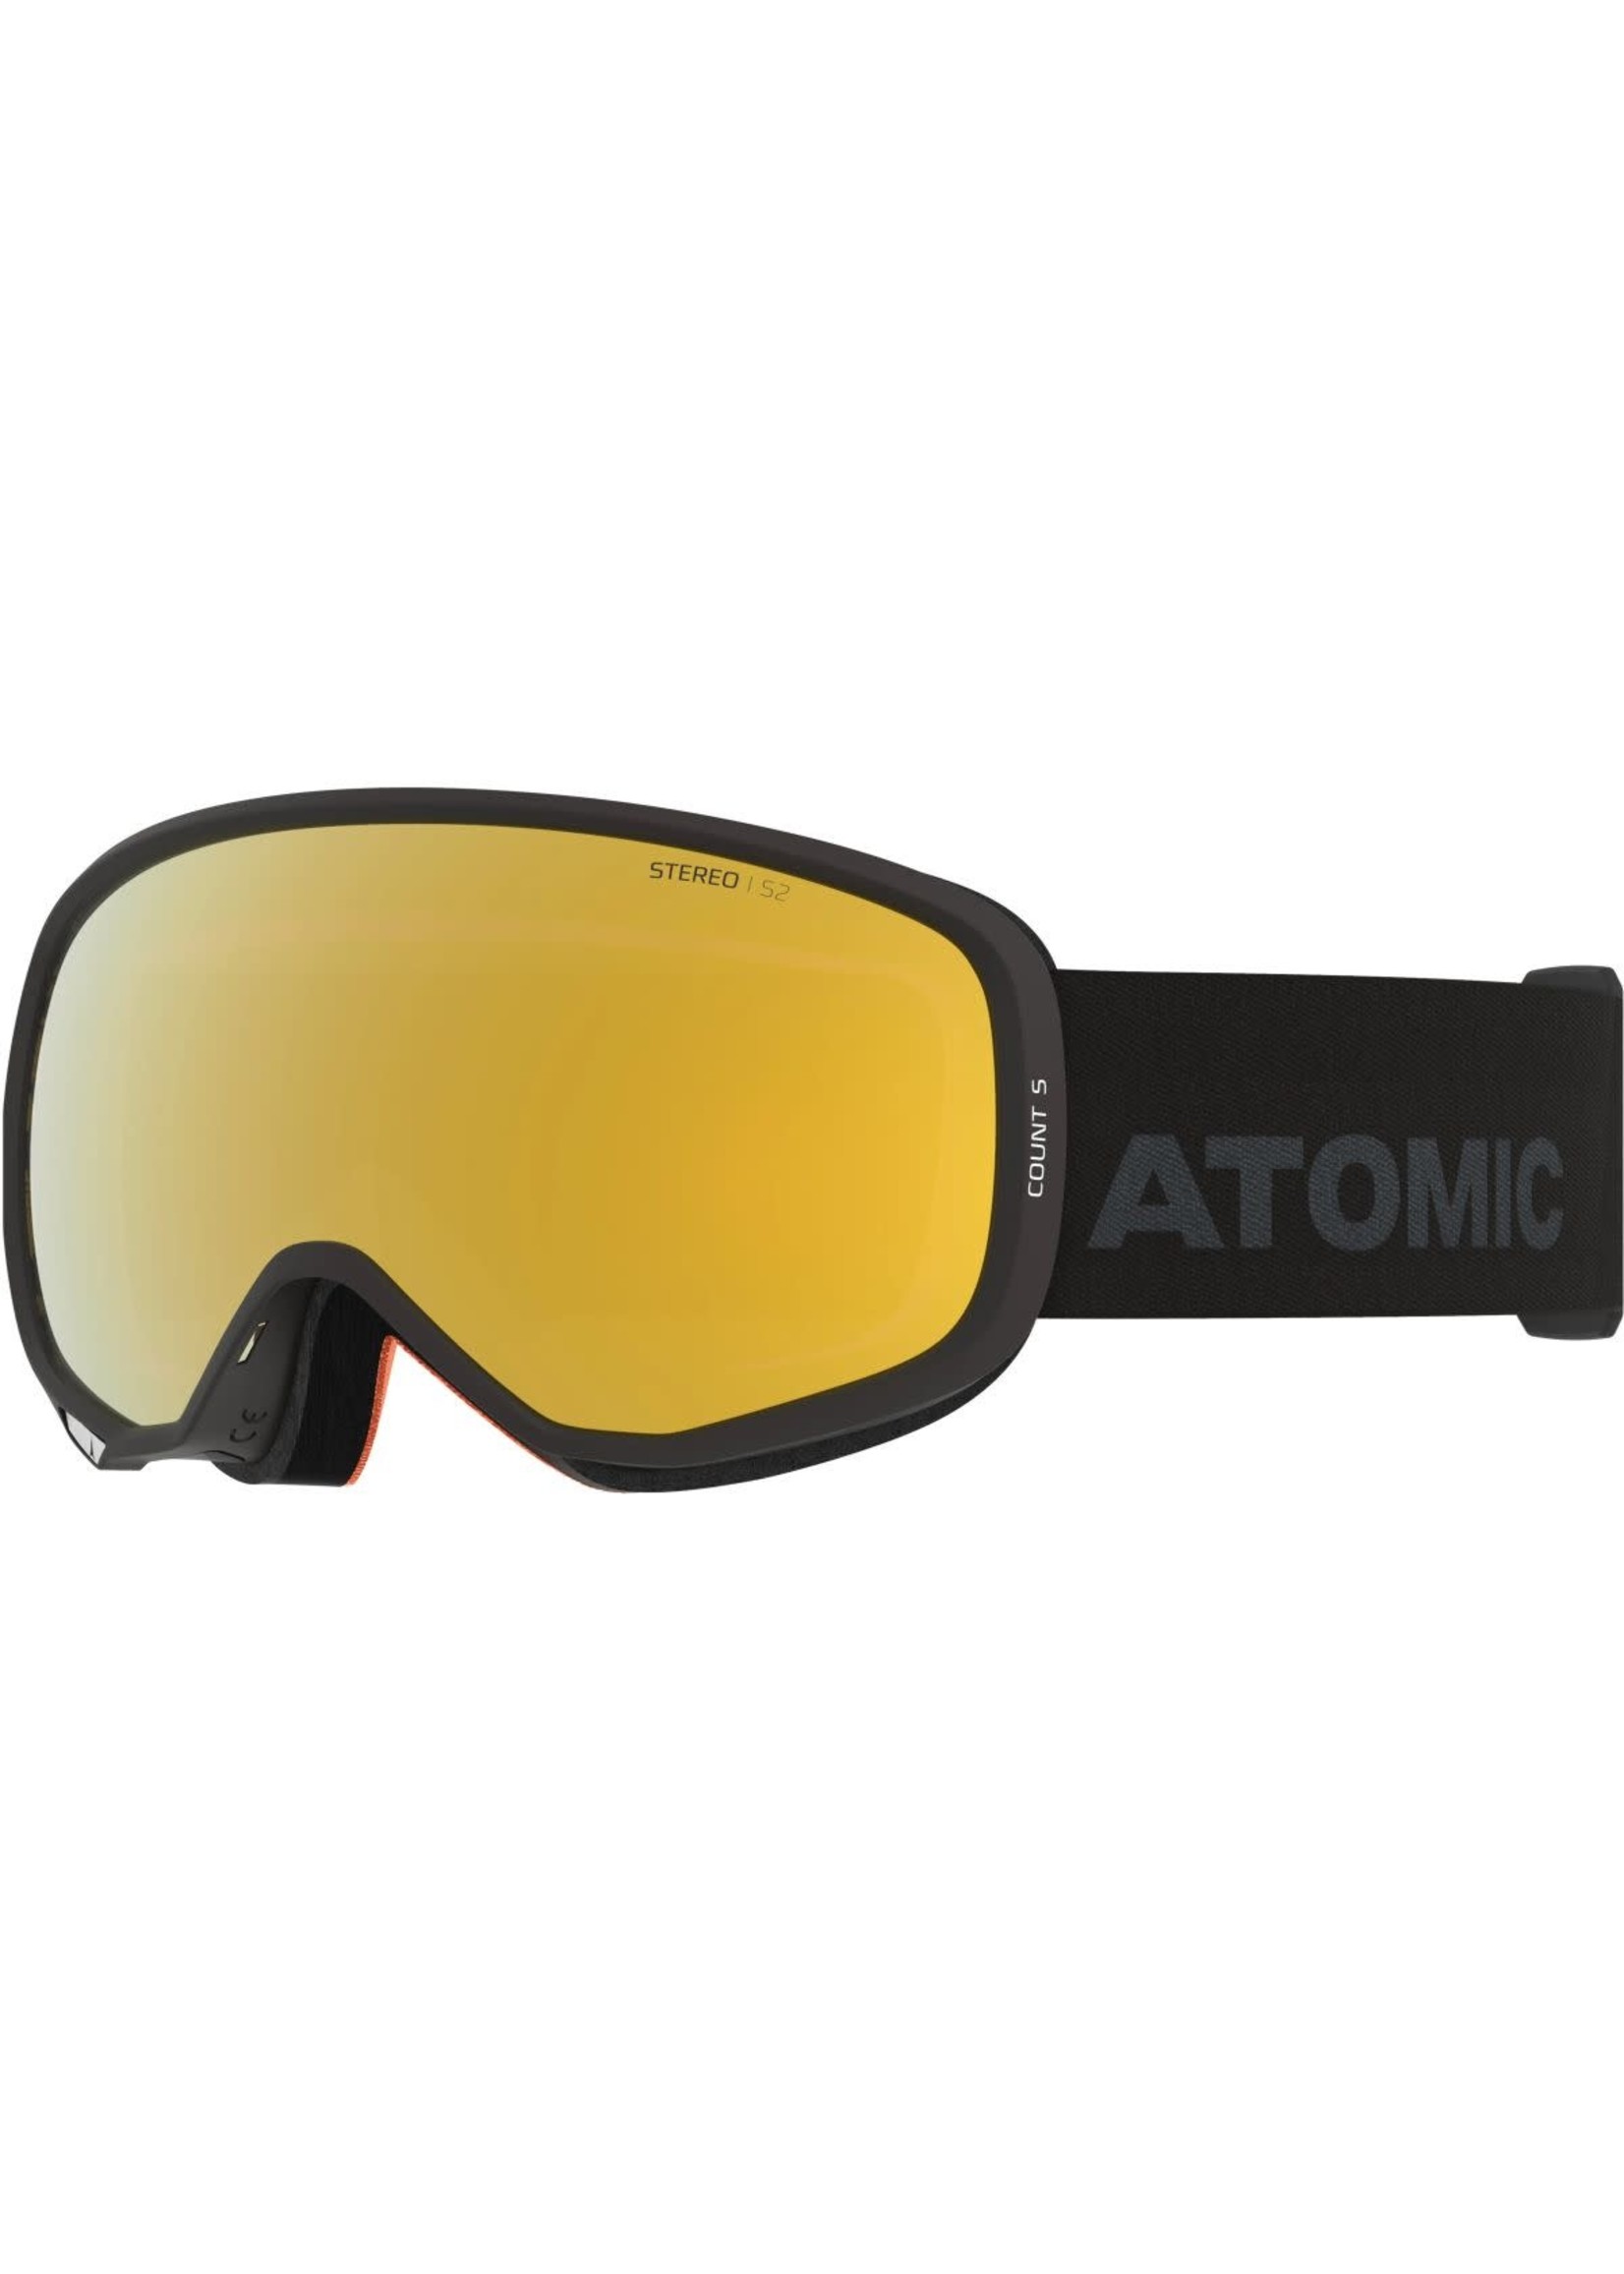 Atomic Atomic Count S Stereo Goggles